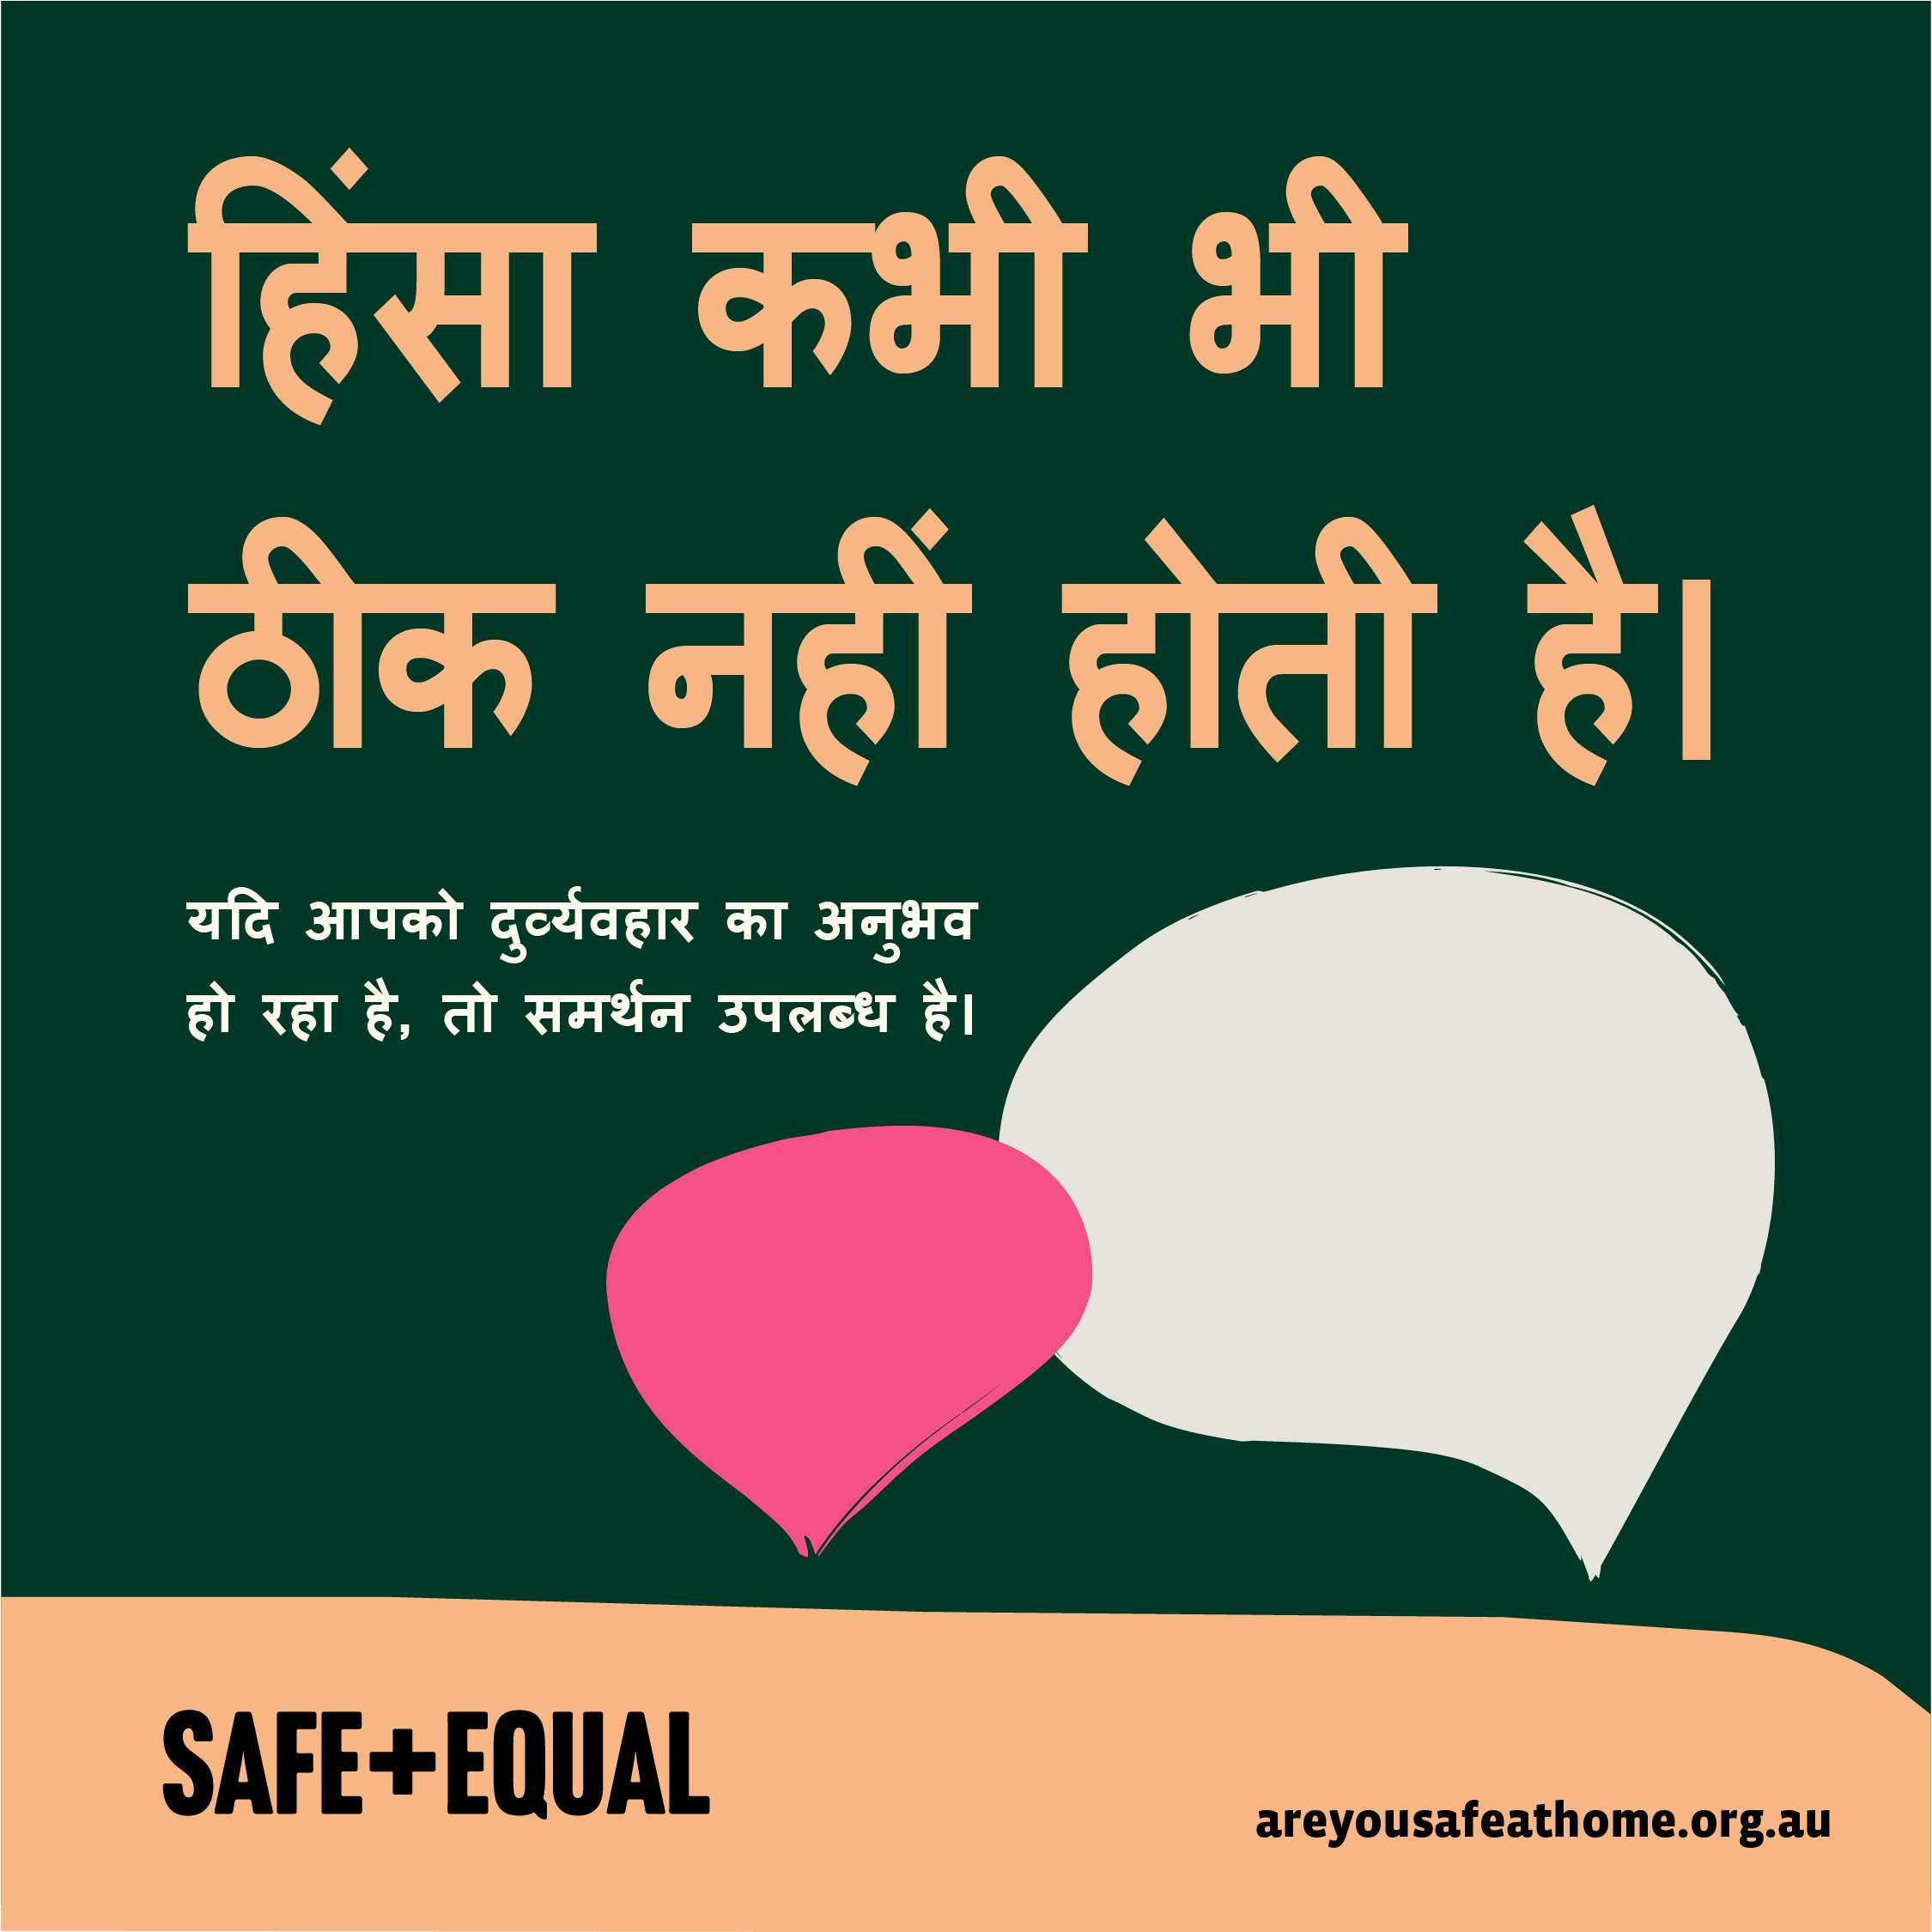 Social media tile for Are you safe at home translated into Hindi